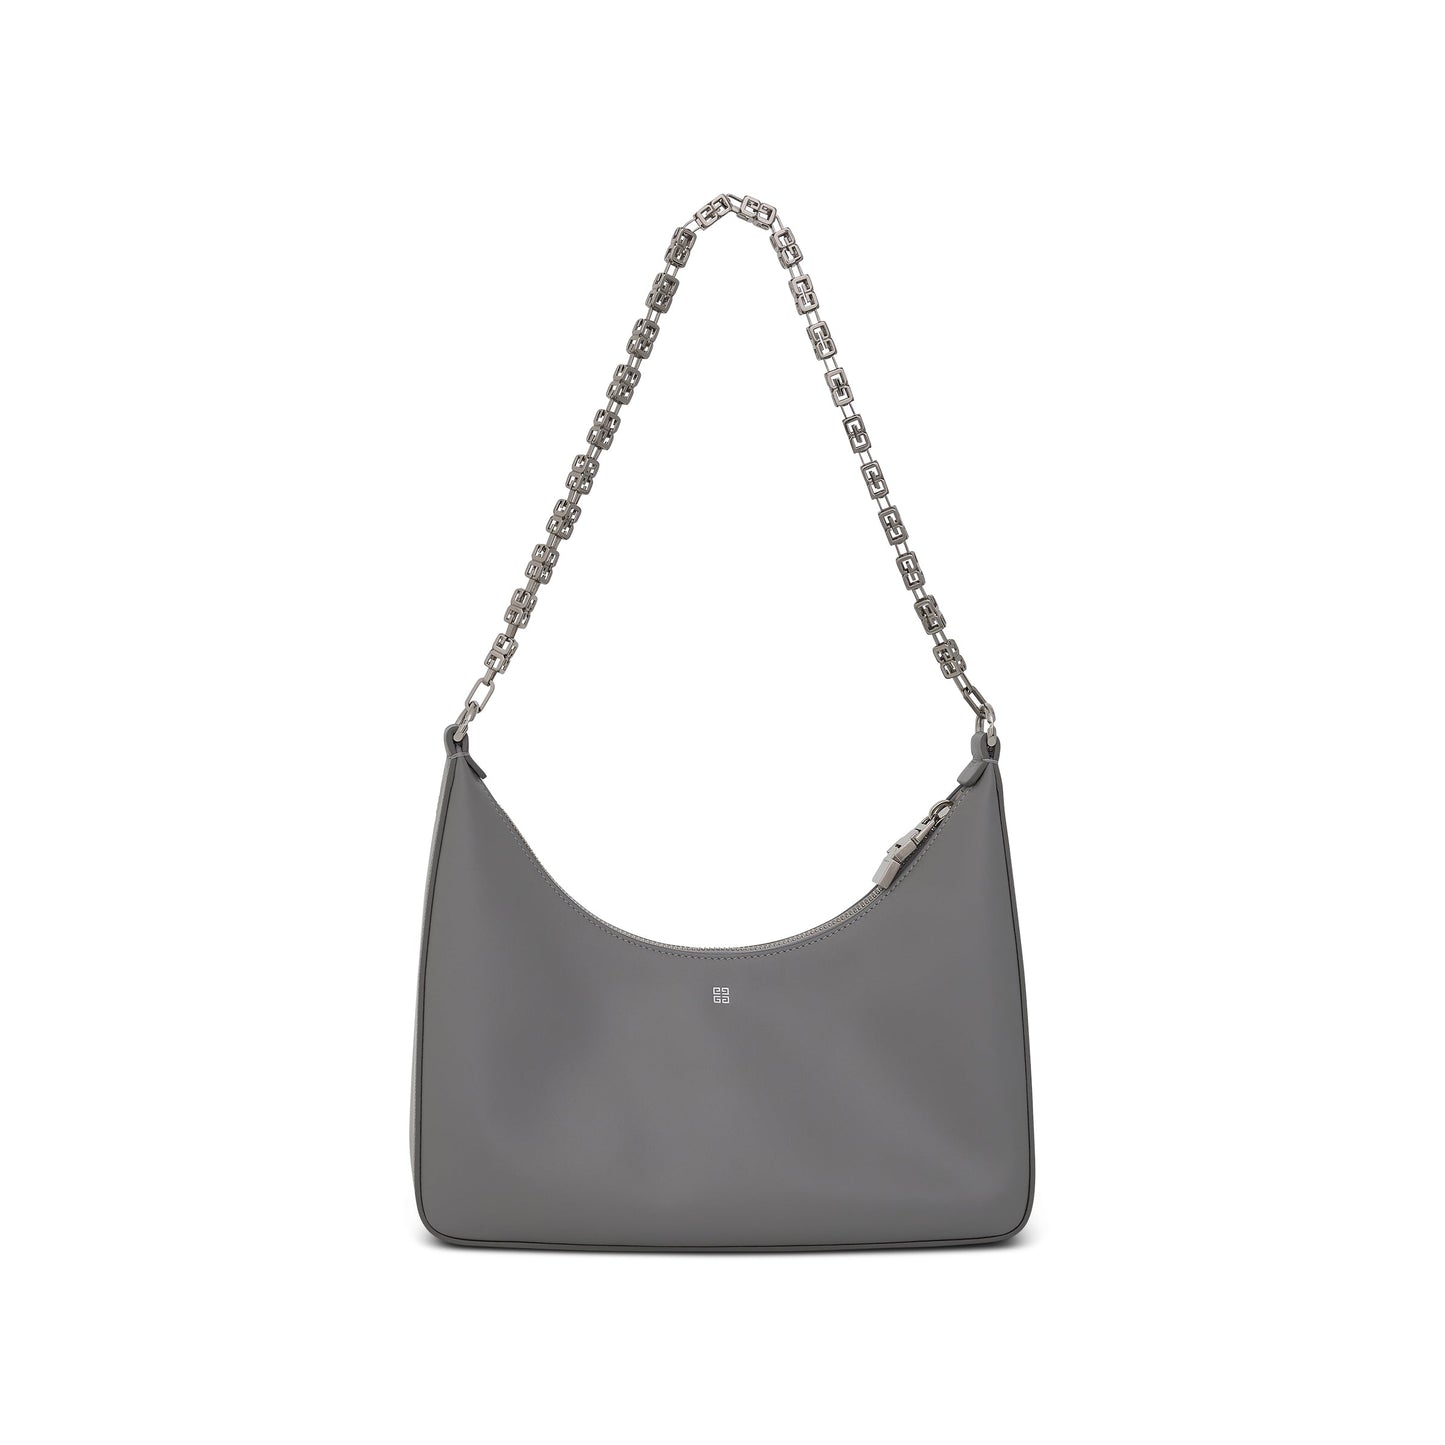 Small Moon Cut Out Bag in Calf Leather in Cloud Grey